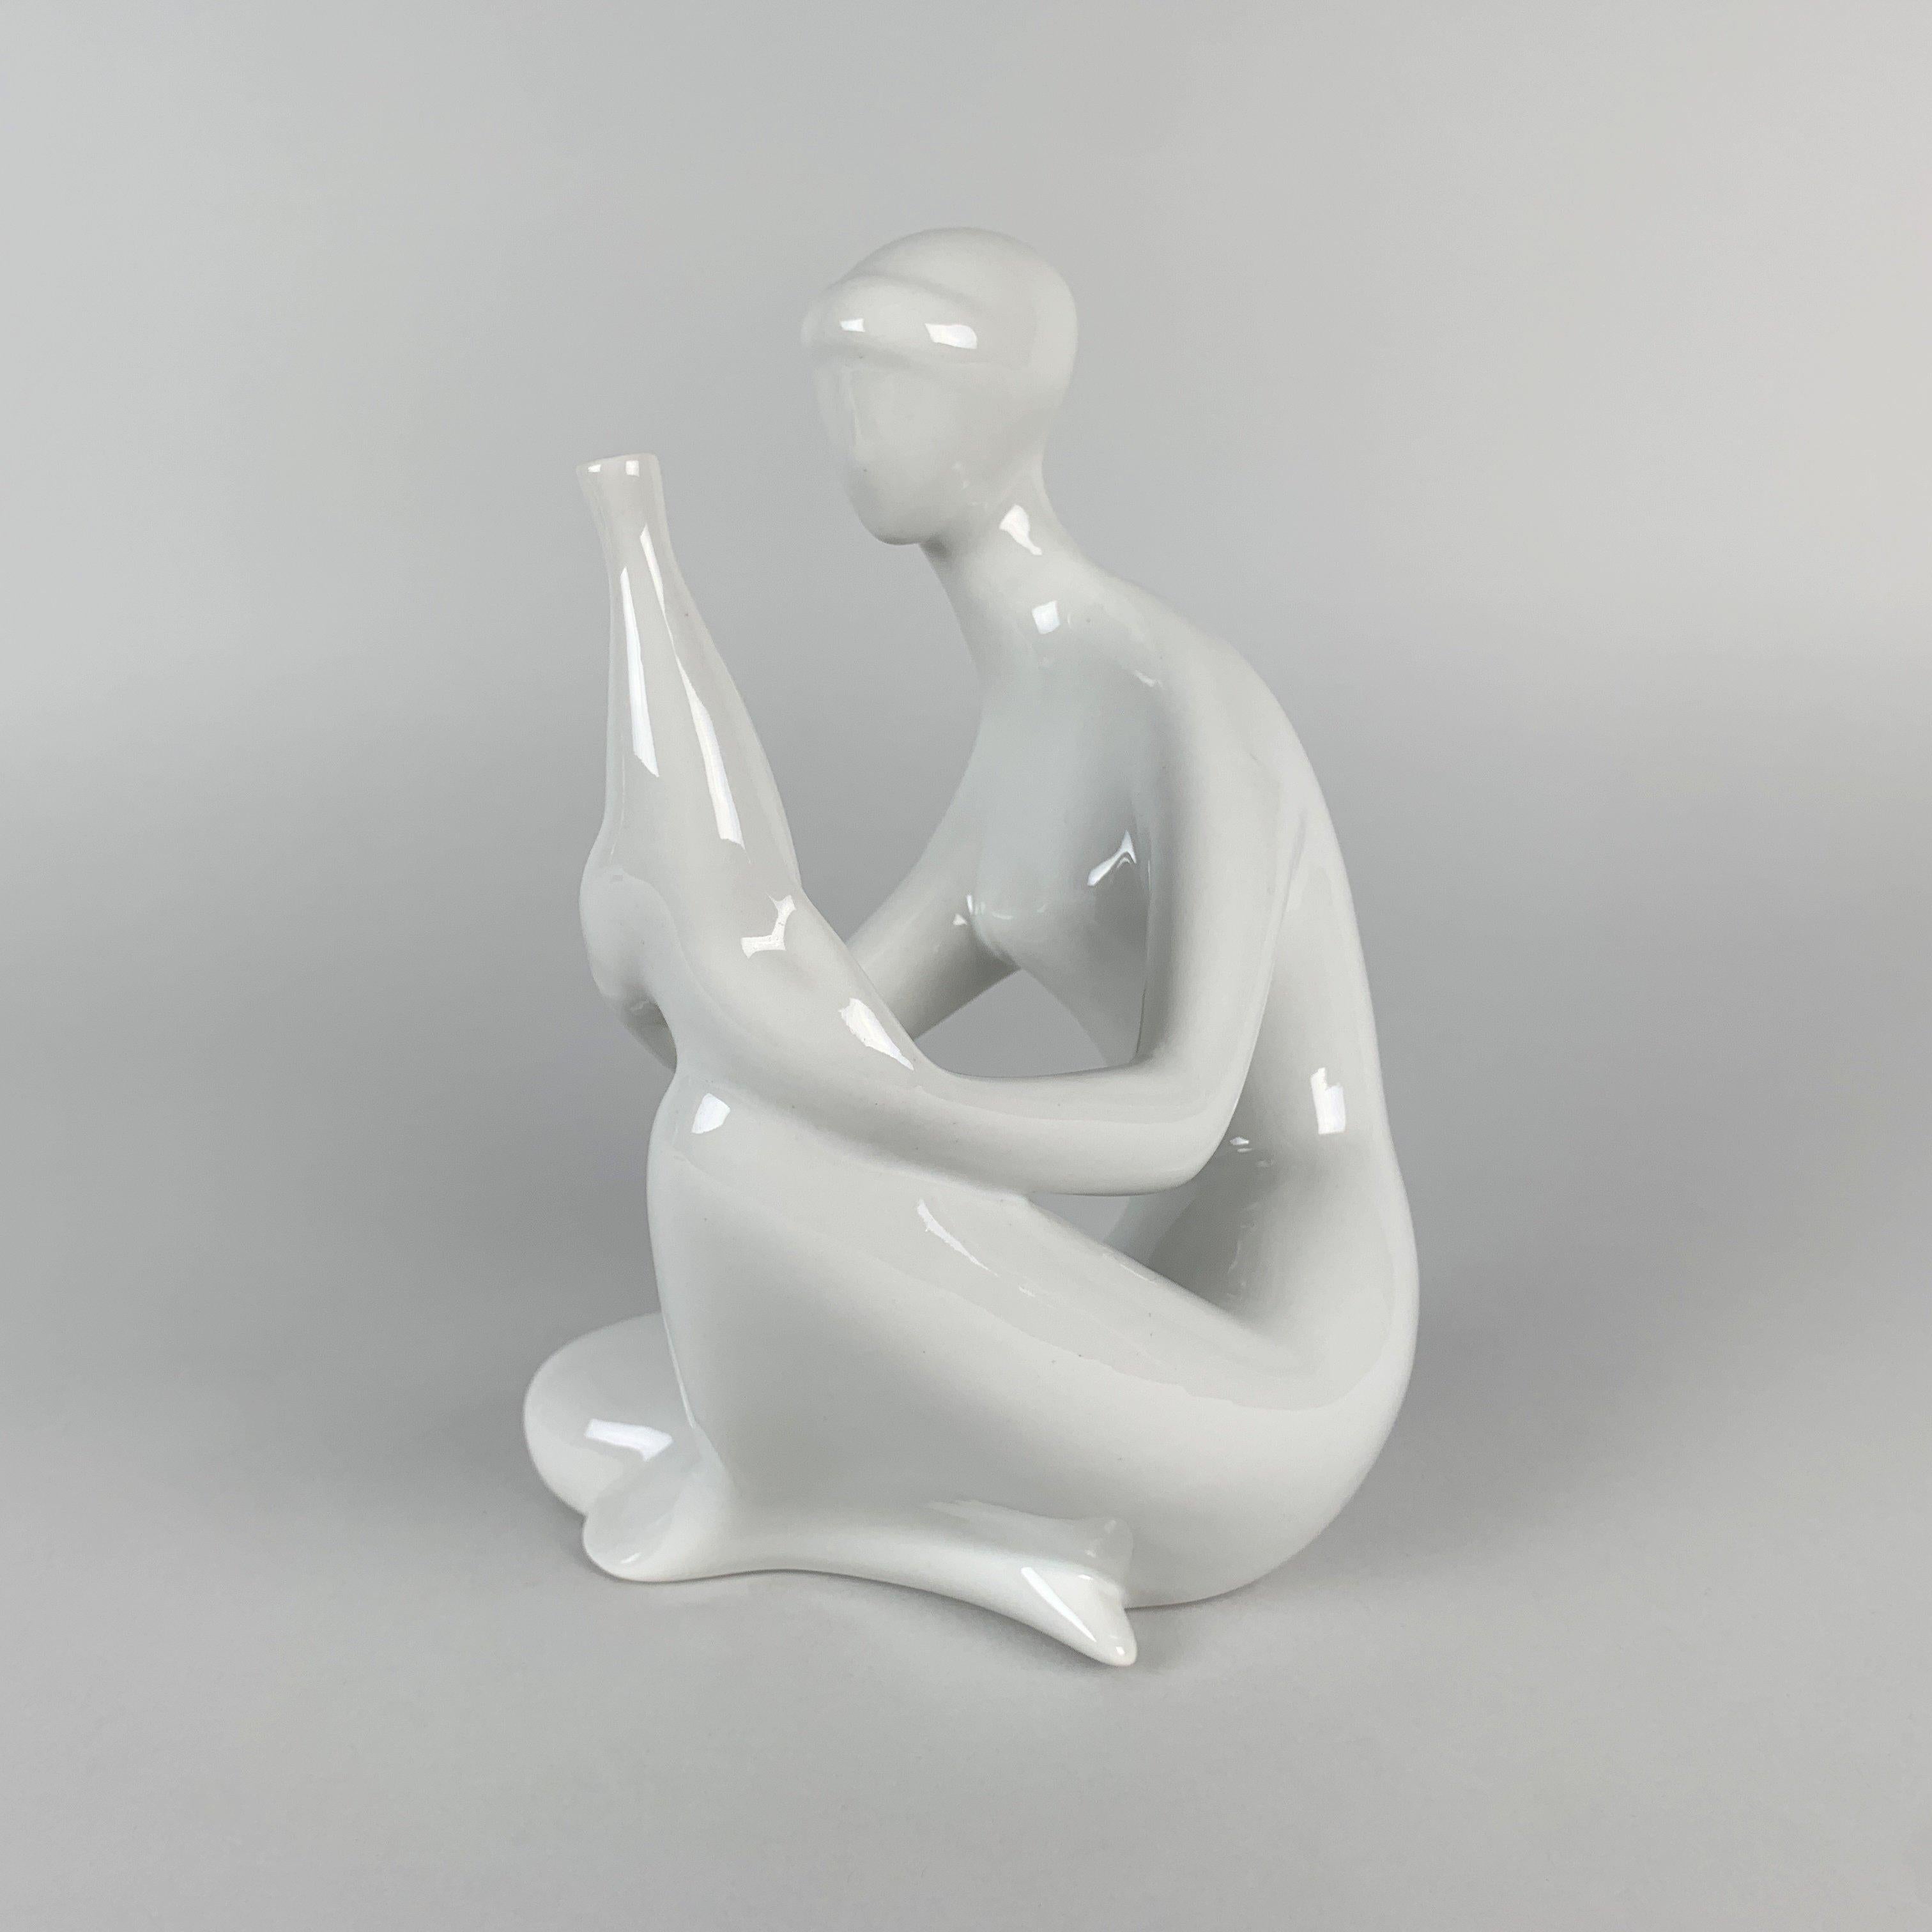 Mid-Century Modern Porcelain Statue by Jitka Forejtova for Royal Dux, Czechoslovakia, 1960s For Sale